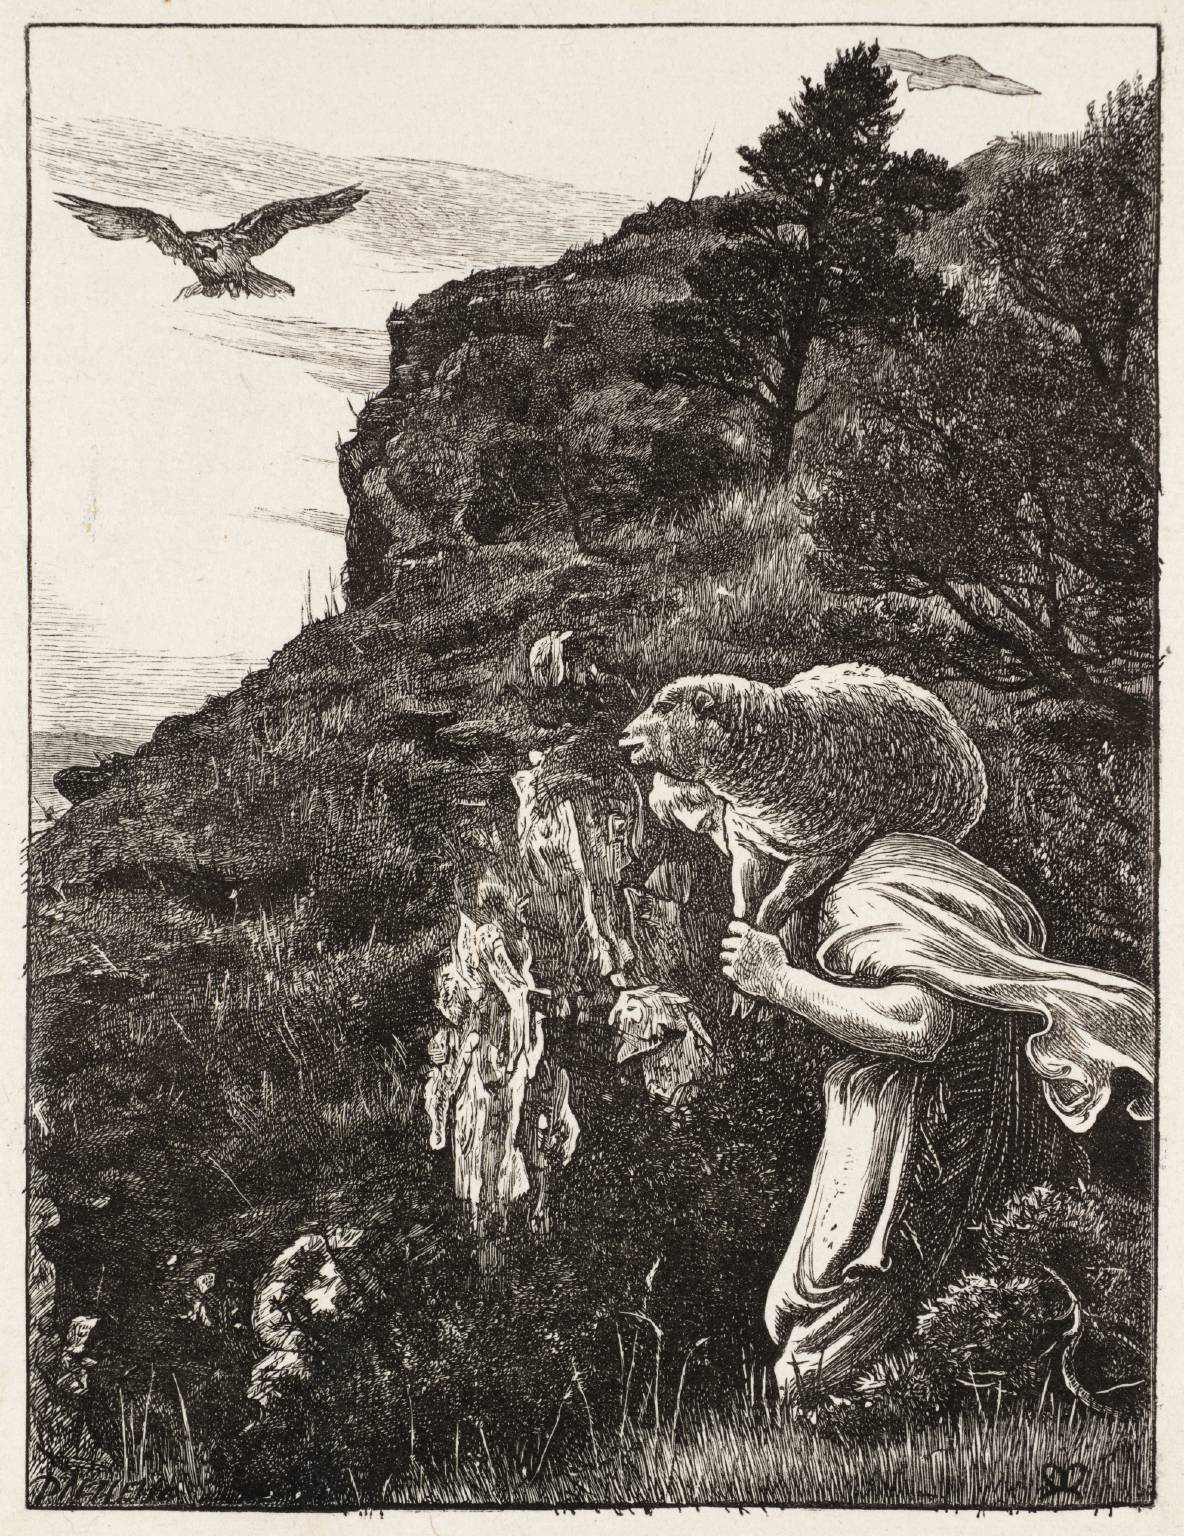 The Lost Sheep published 1864 by Sir John Everett Millais, Bt 1829-1896